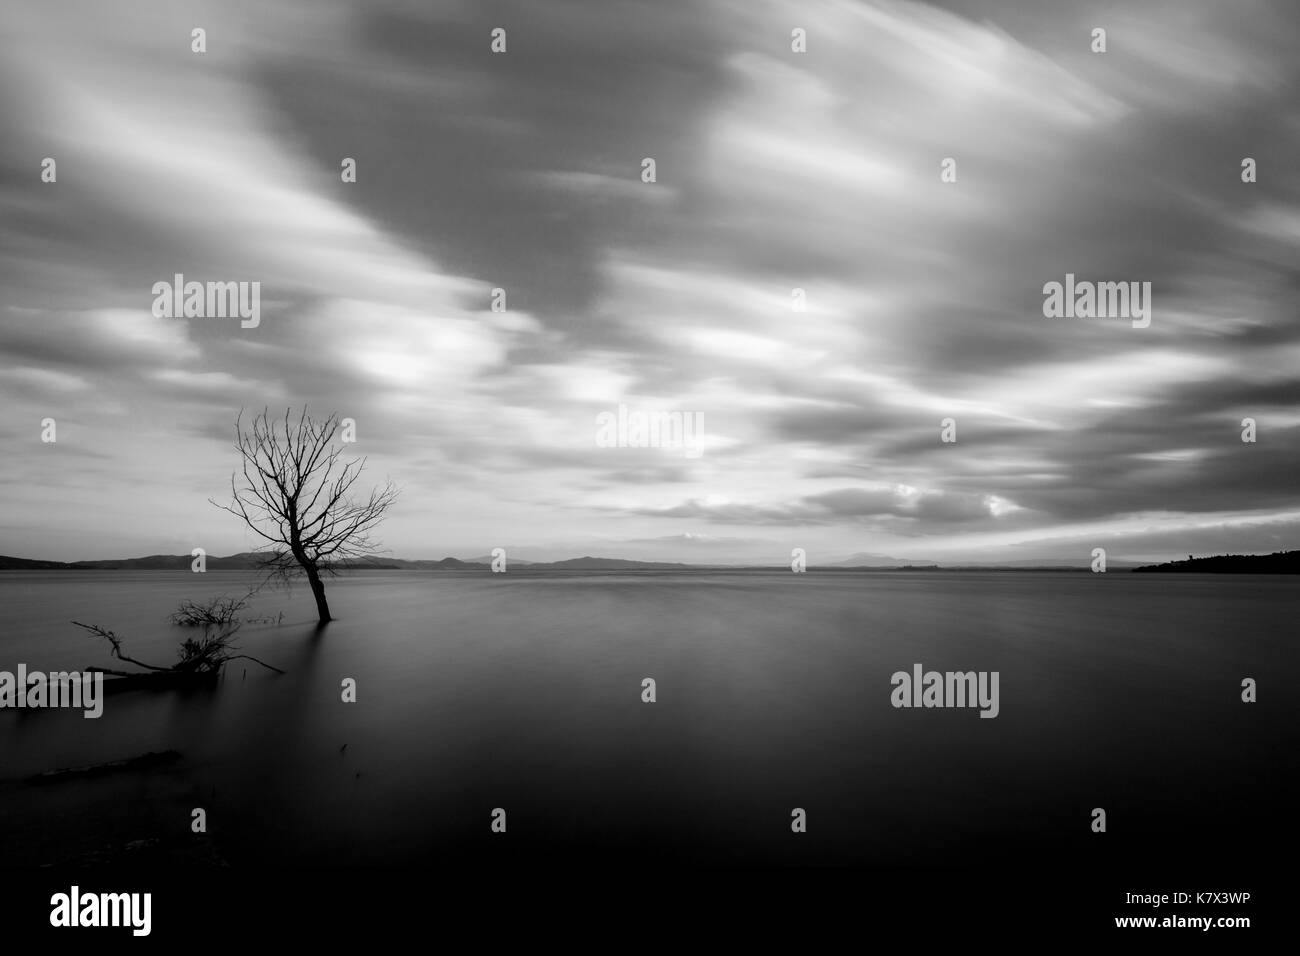 Long exposure of a tree on a lake, with perfectly still water and spectacular sky with moving clouds Stock Photo